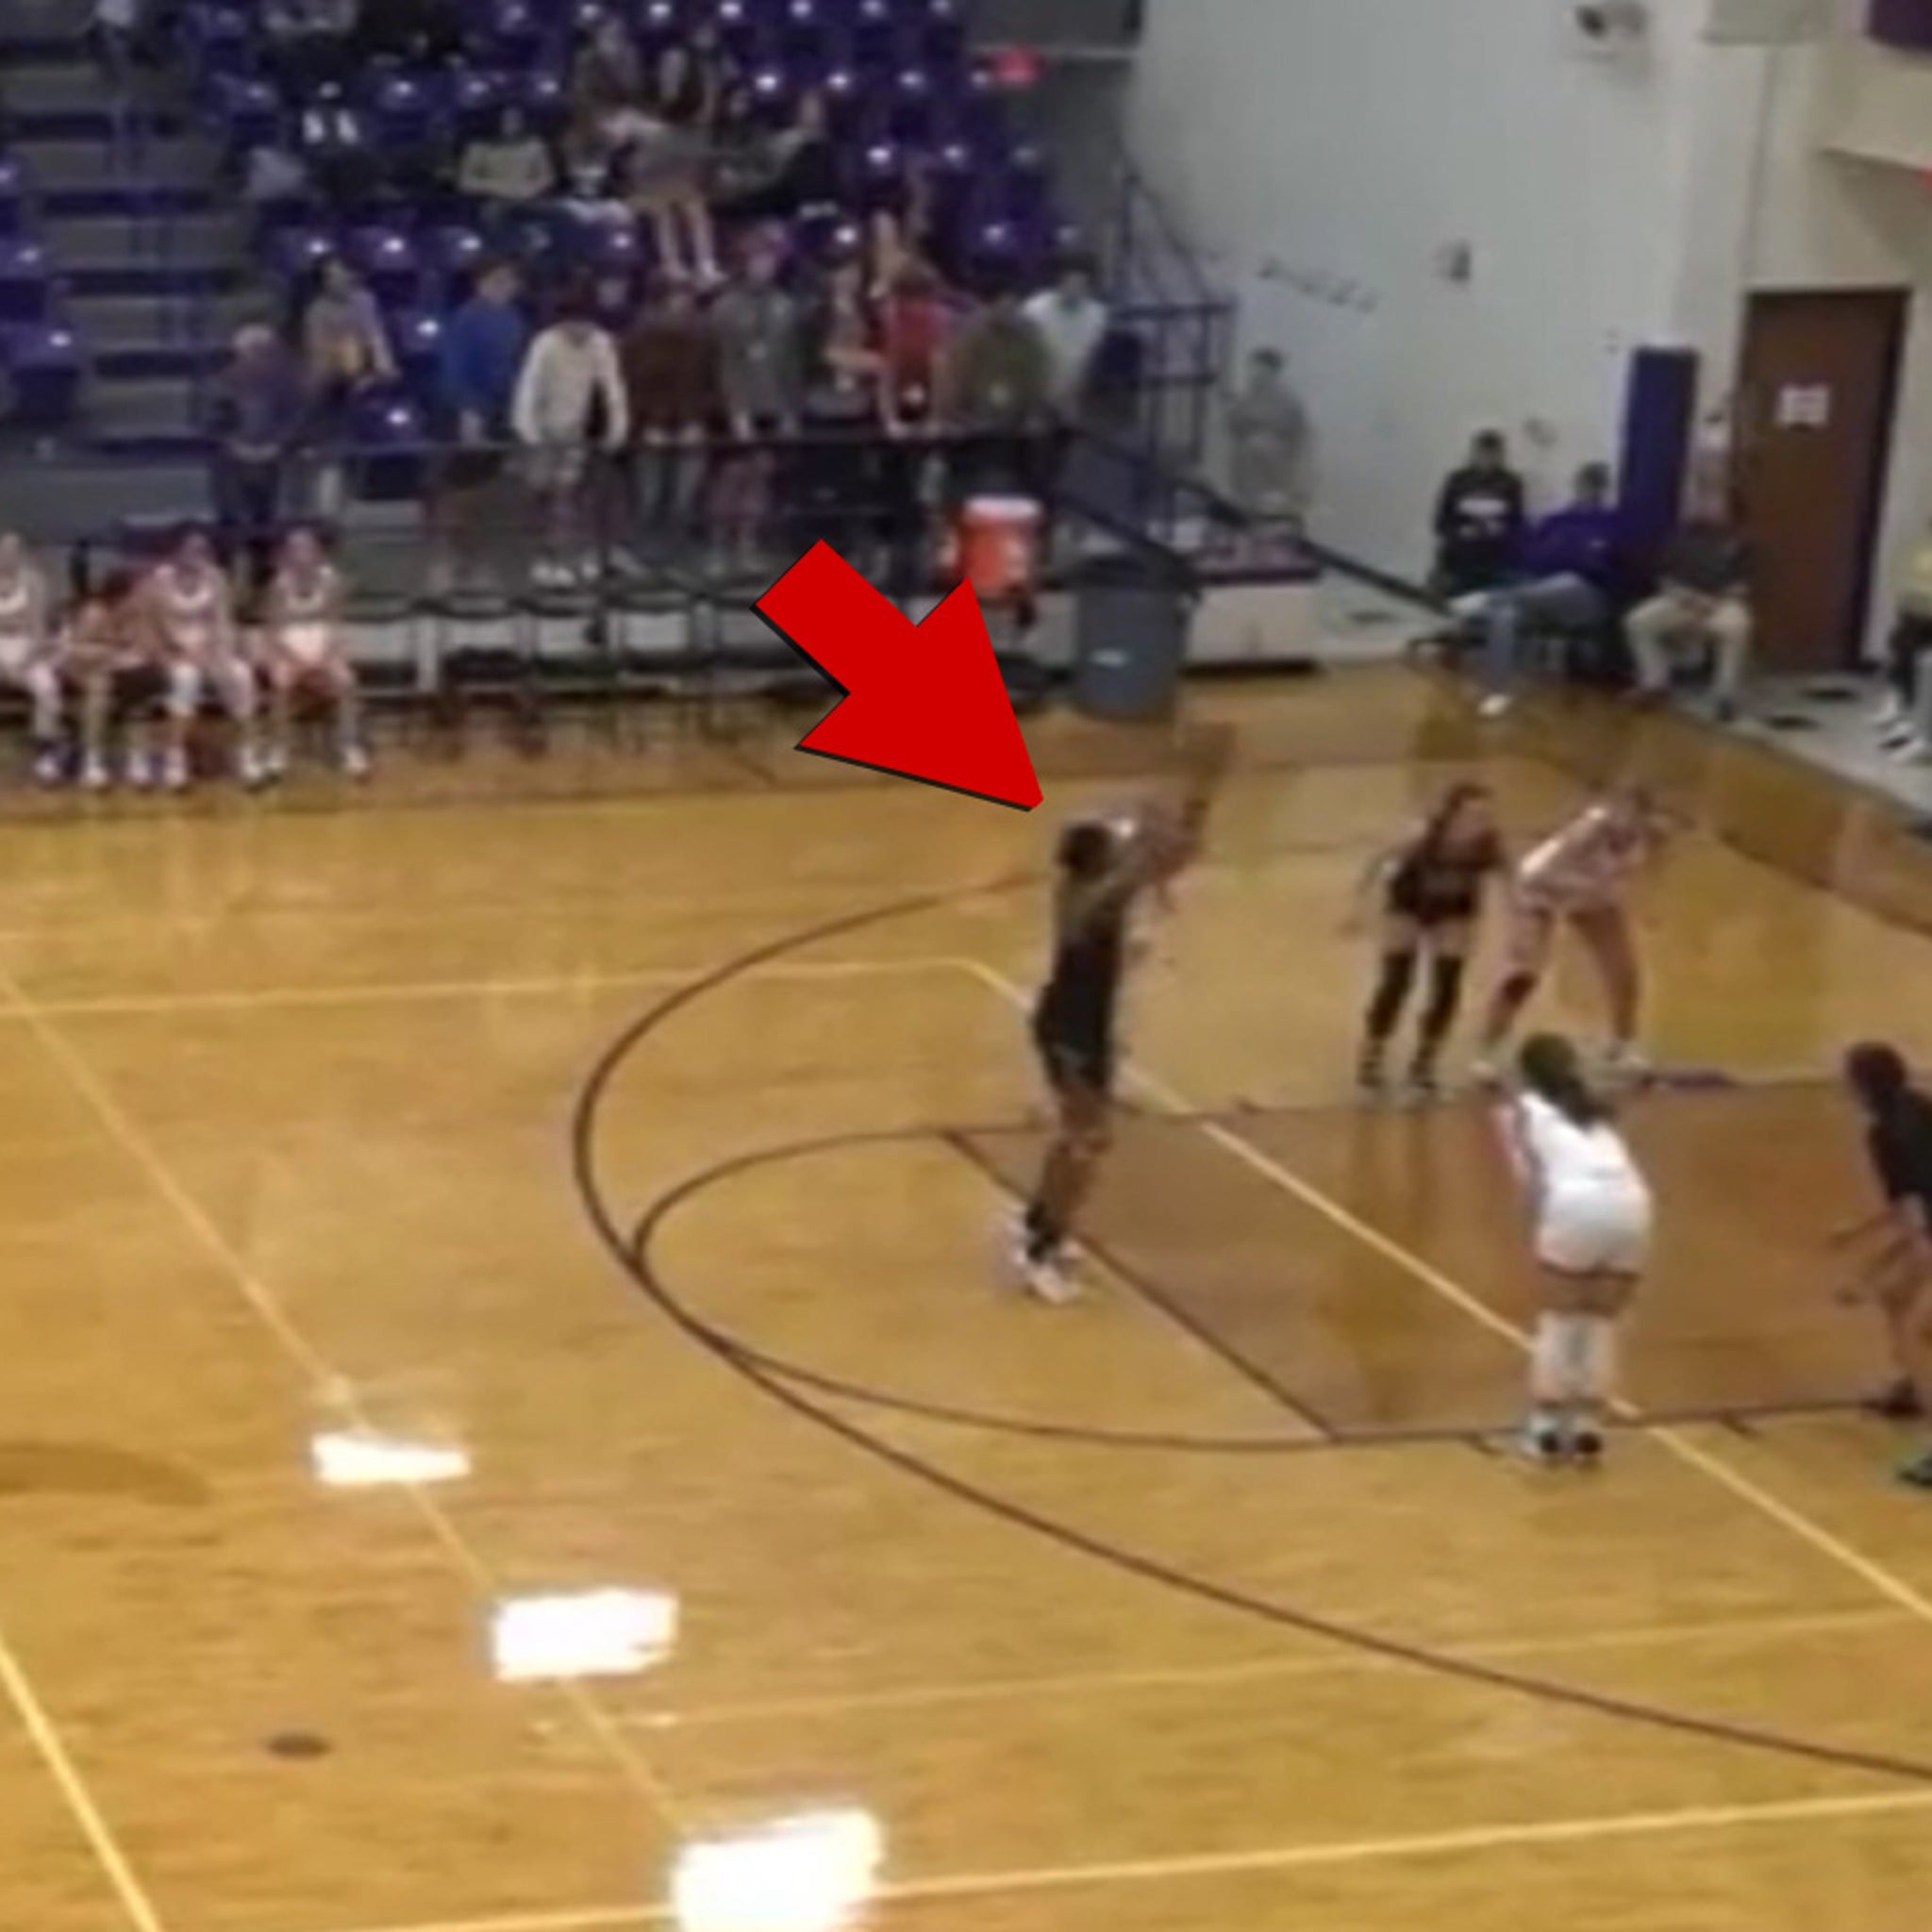 Fans Allegedly Make Monkey Noises At Black Player During H.S. Basketball Game - TMZ (Picture 2)